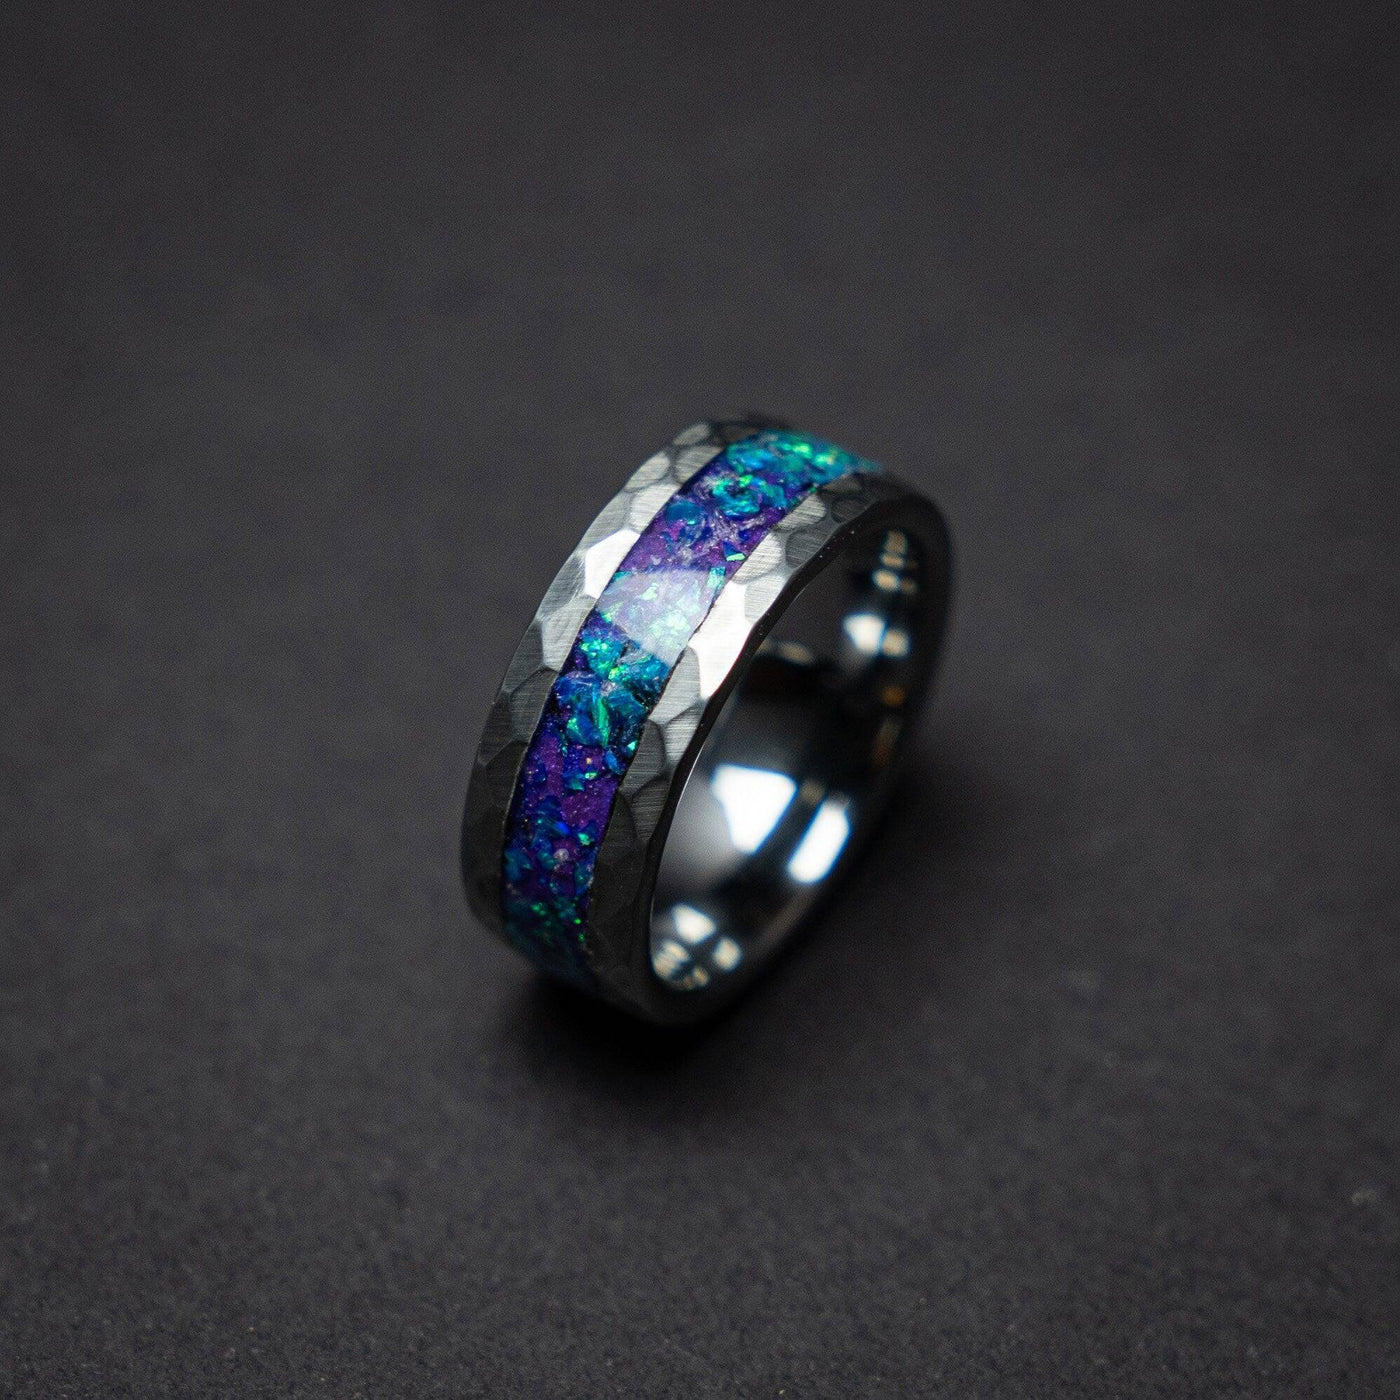 Hammered tungsten ring with galaxy opal